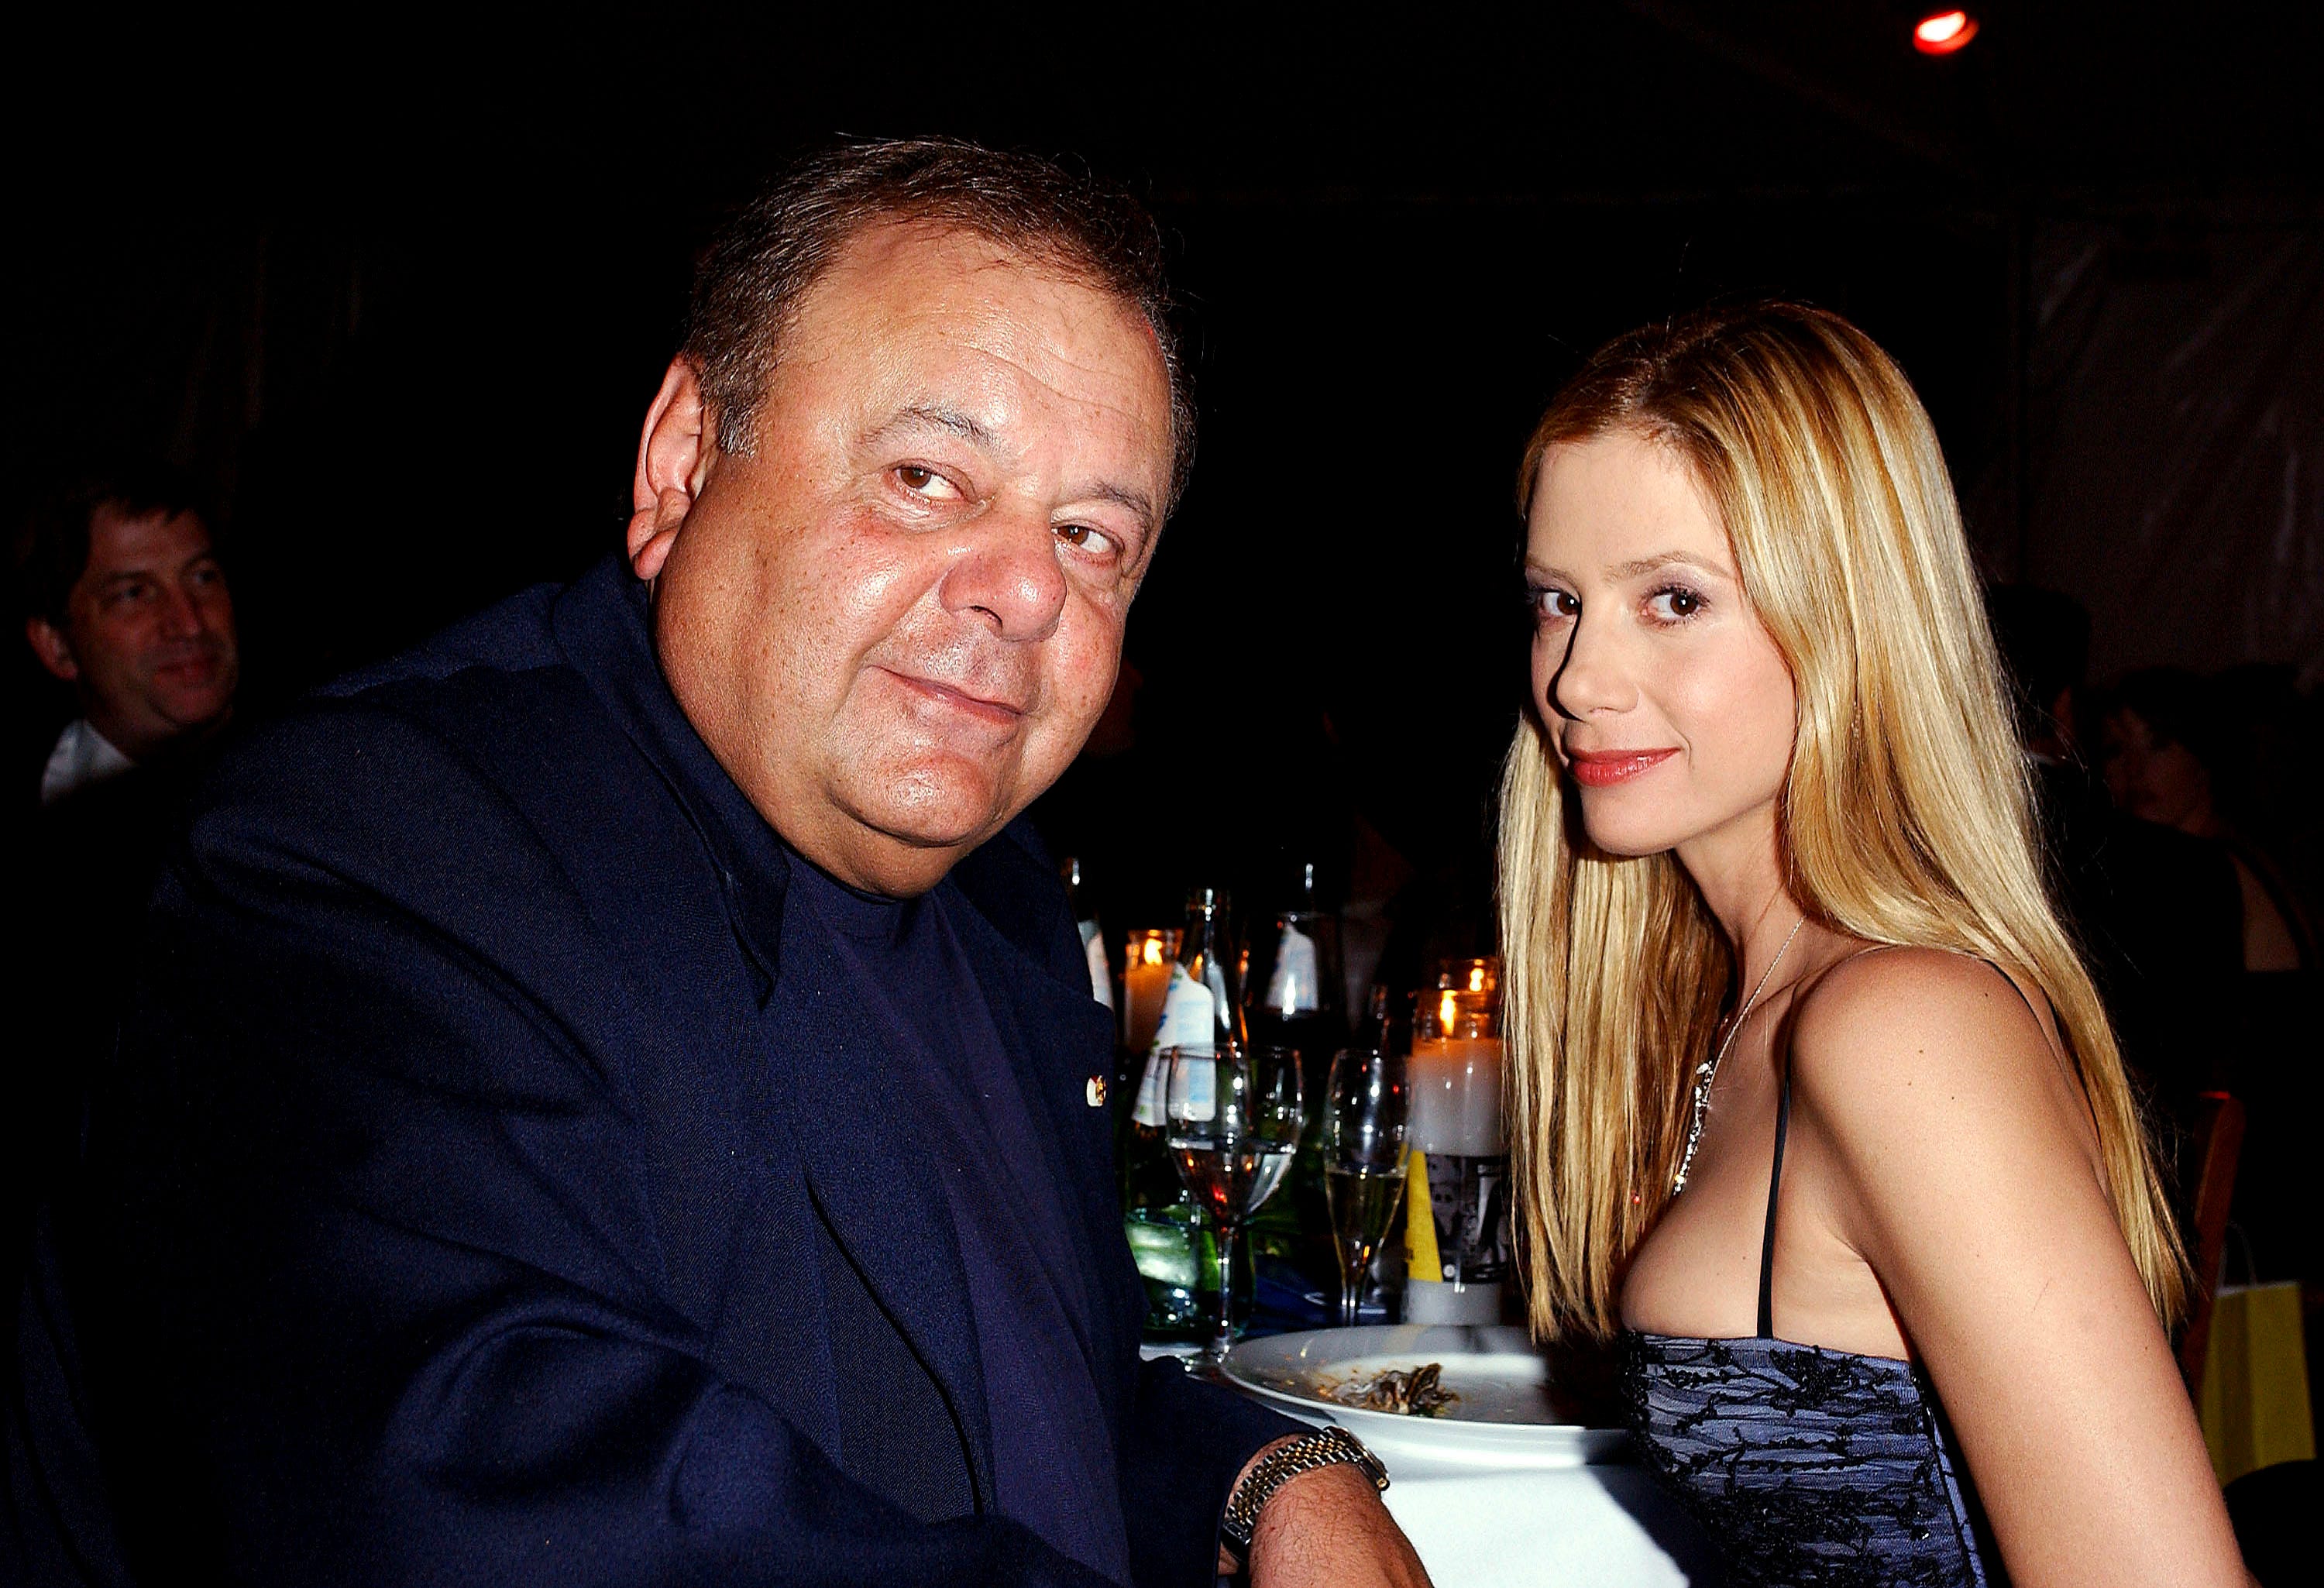 Mira Sorvino of 'Dancing with the Stars' shares how dad, Paul Sorvino, transformed her into Oscar winner